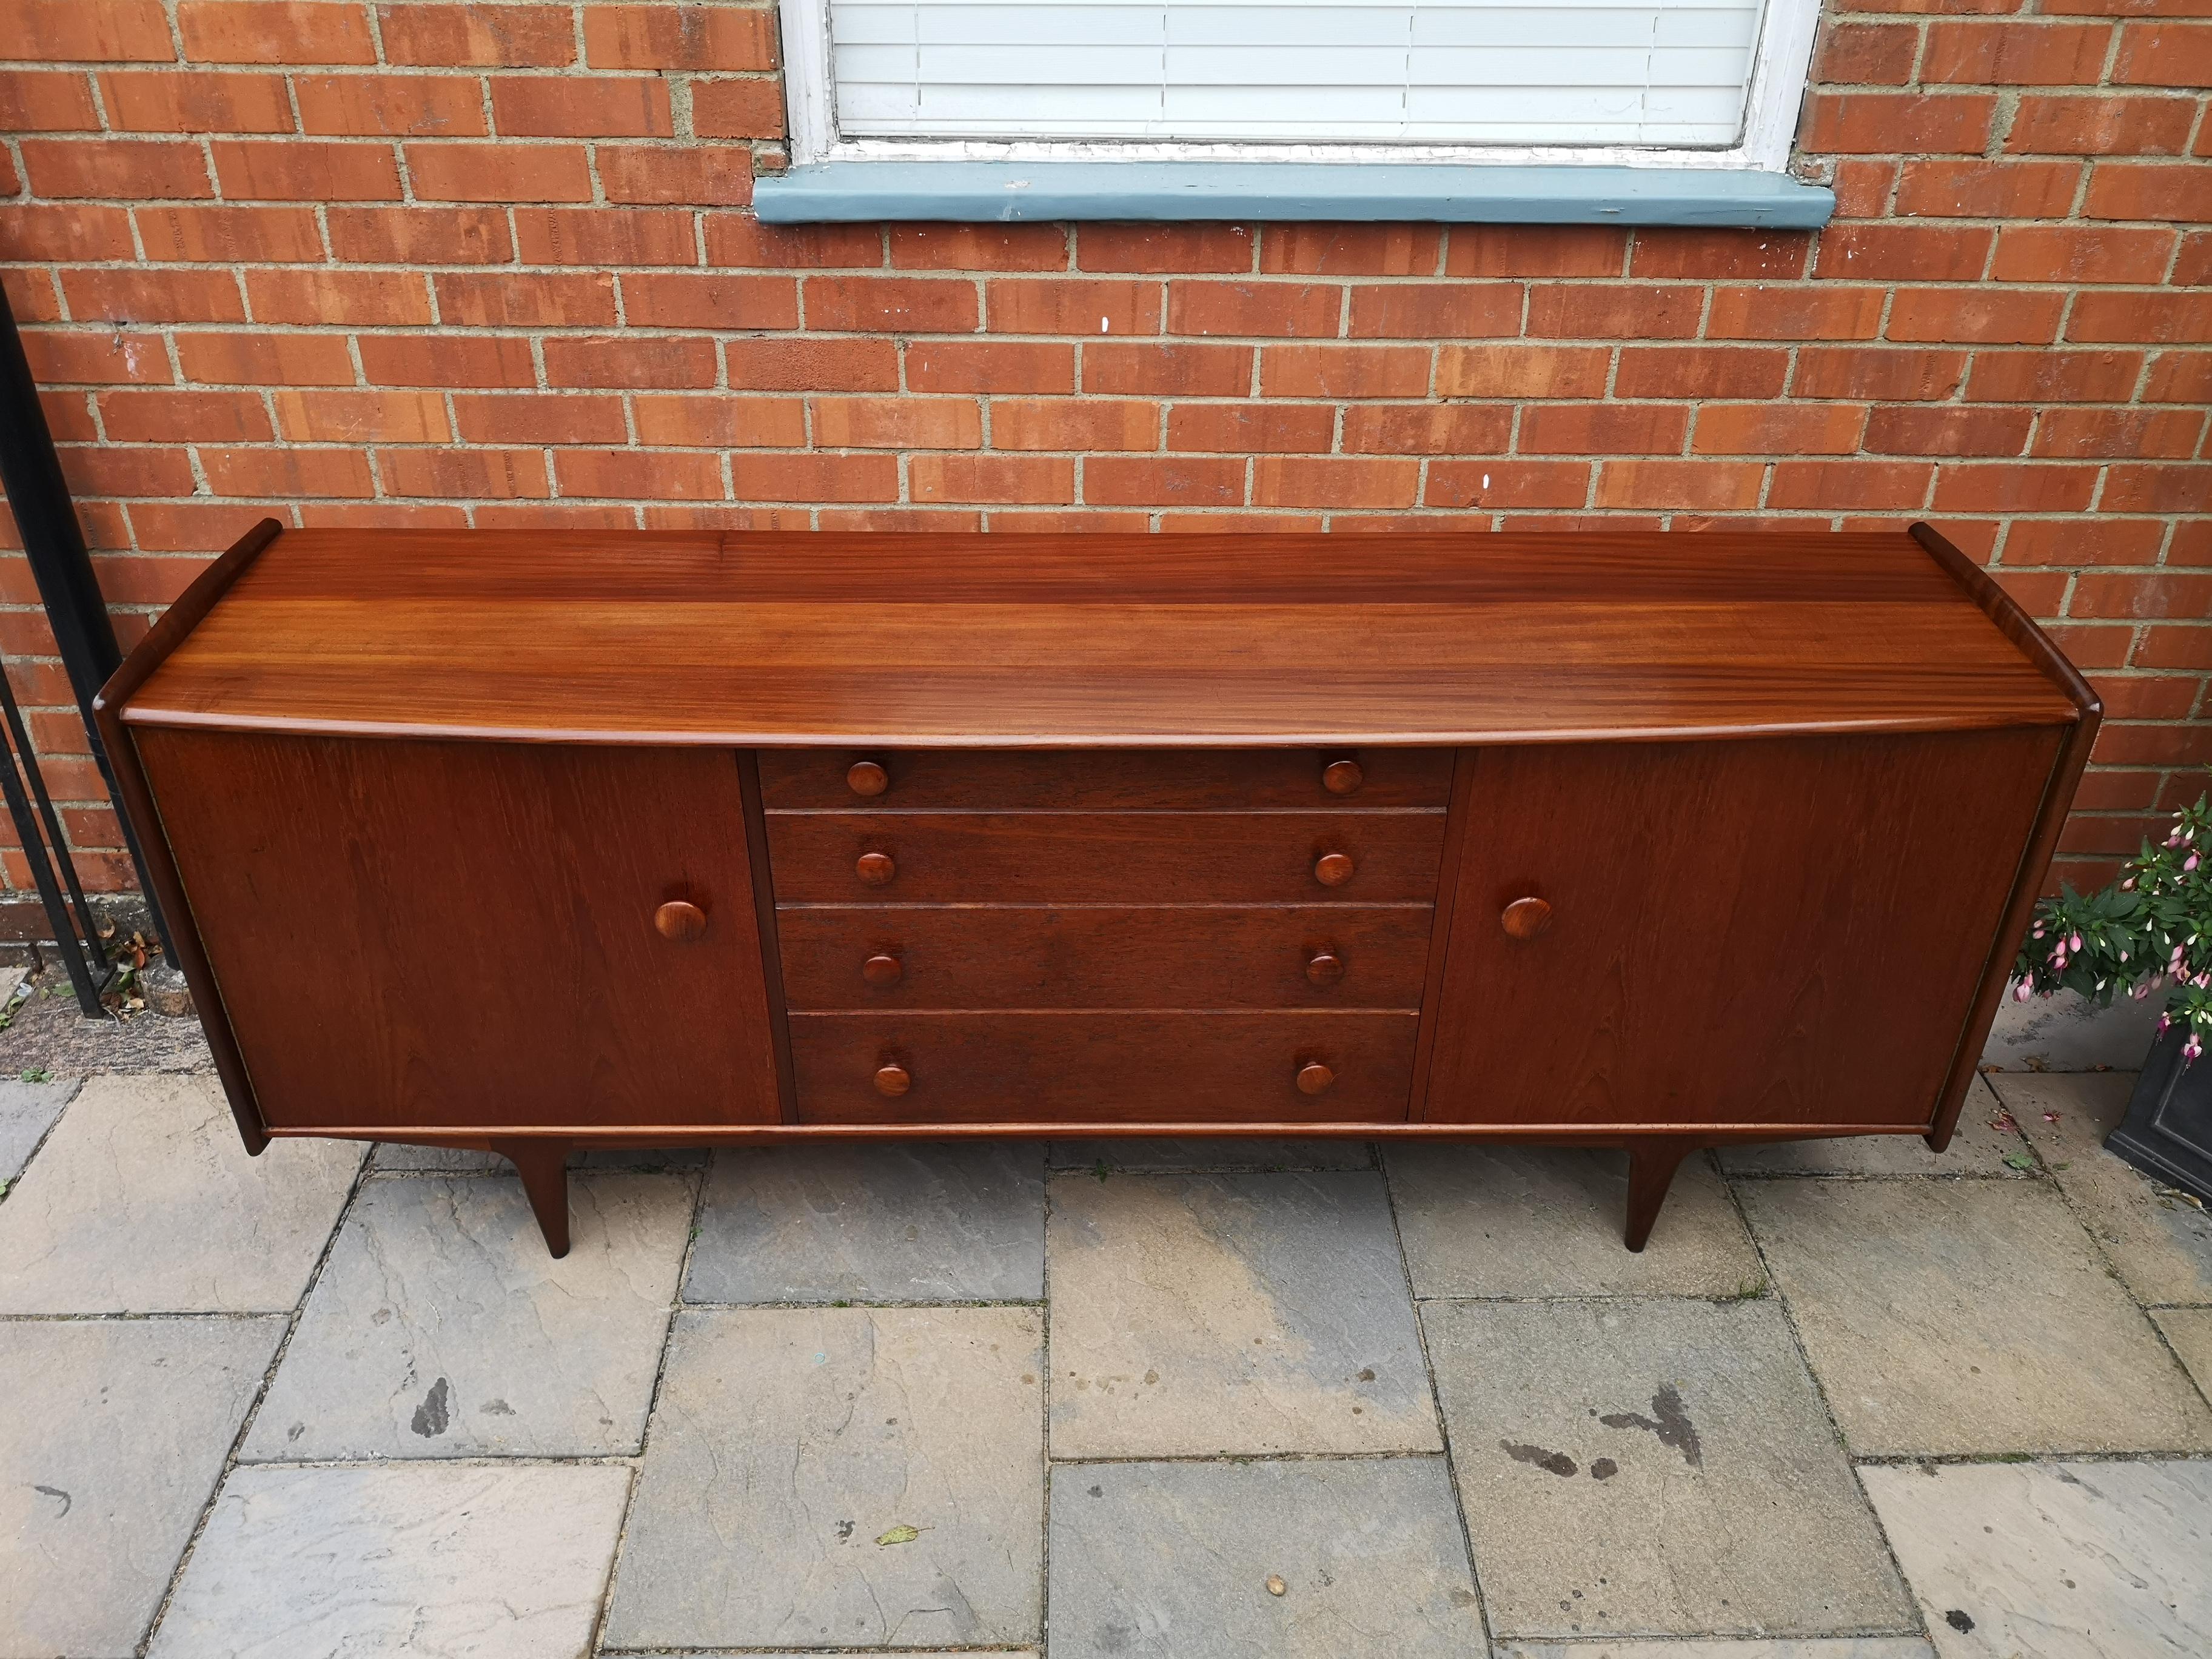 Stunning midcentury solid teak and Afromosia sideboard by John Herbert for A Younger Ltd, Scotland. Very good vintage condition with some signs of use as expected.